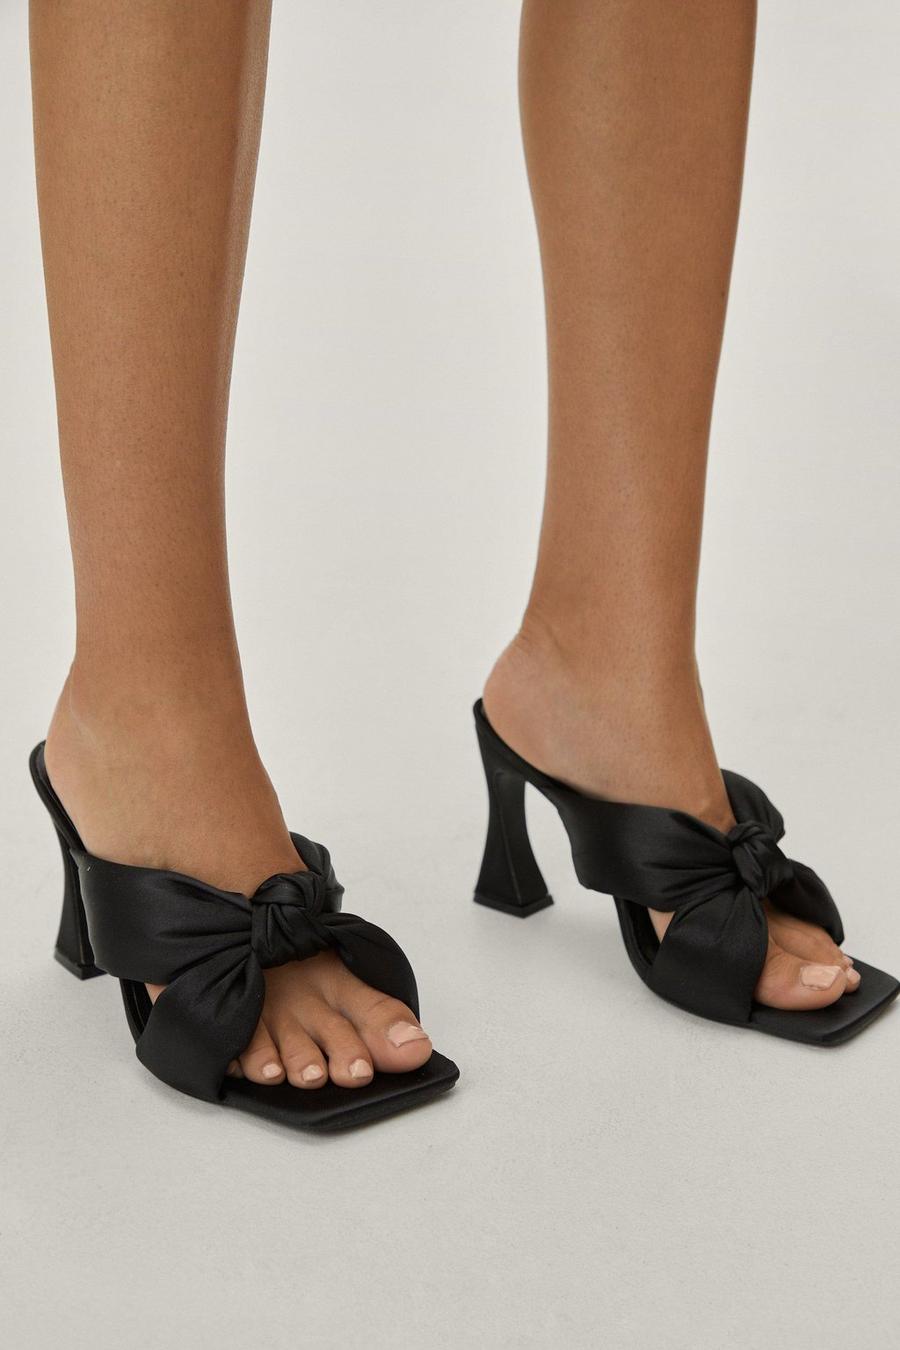 Black Satin Knot Front Heeled Mules